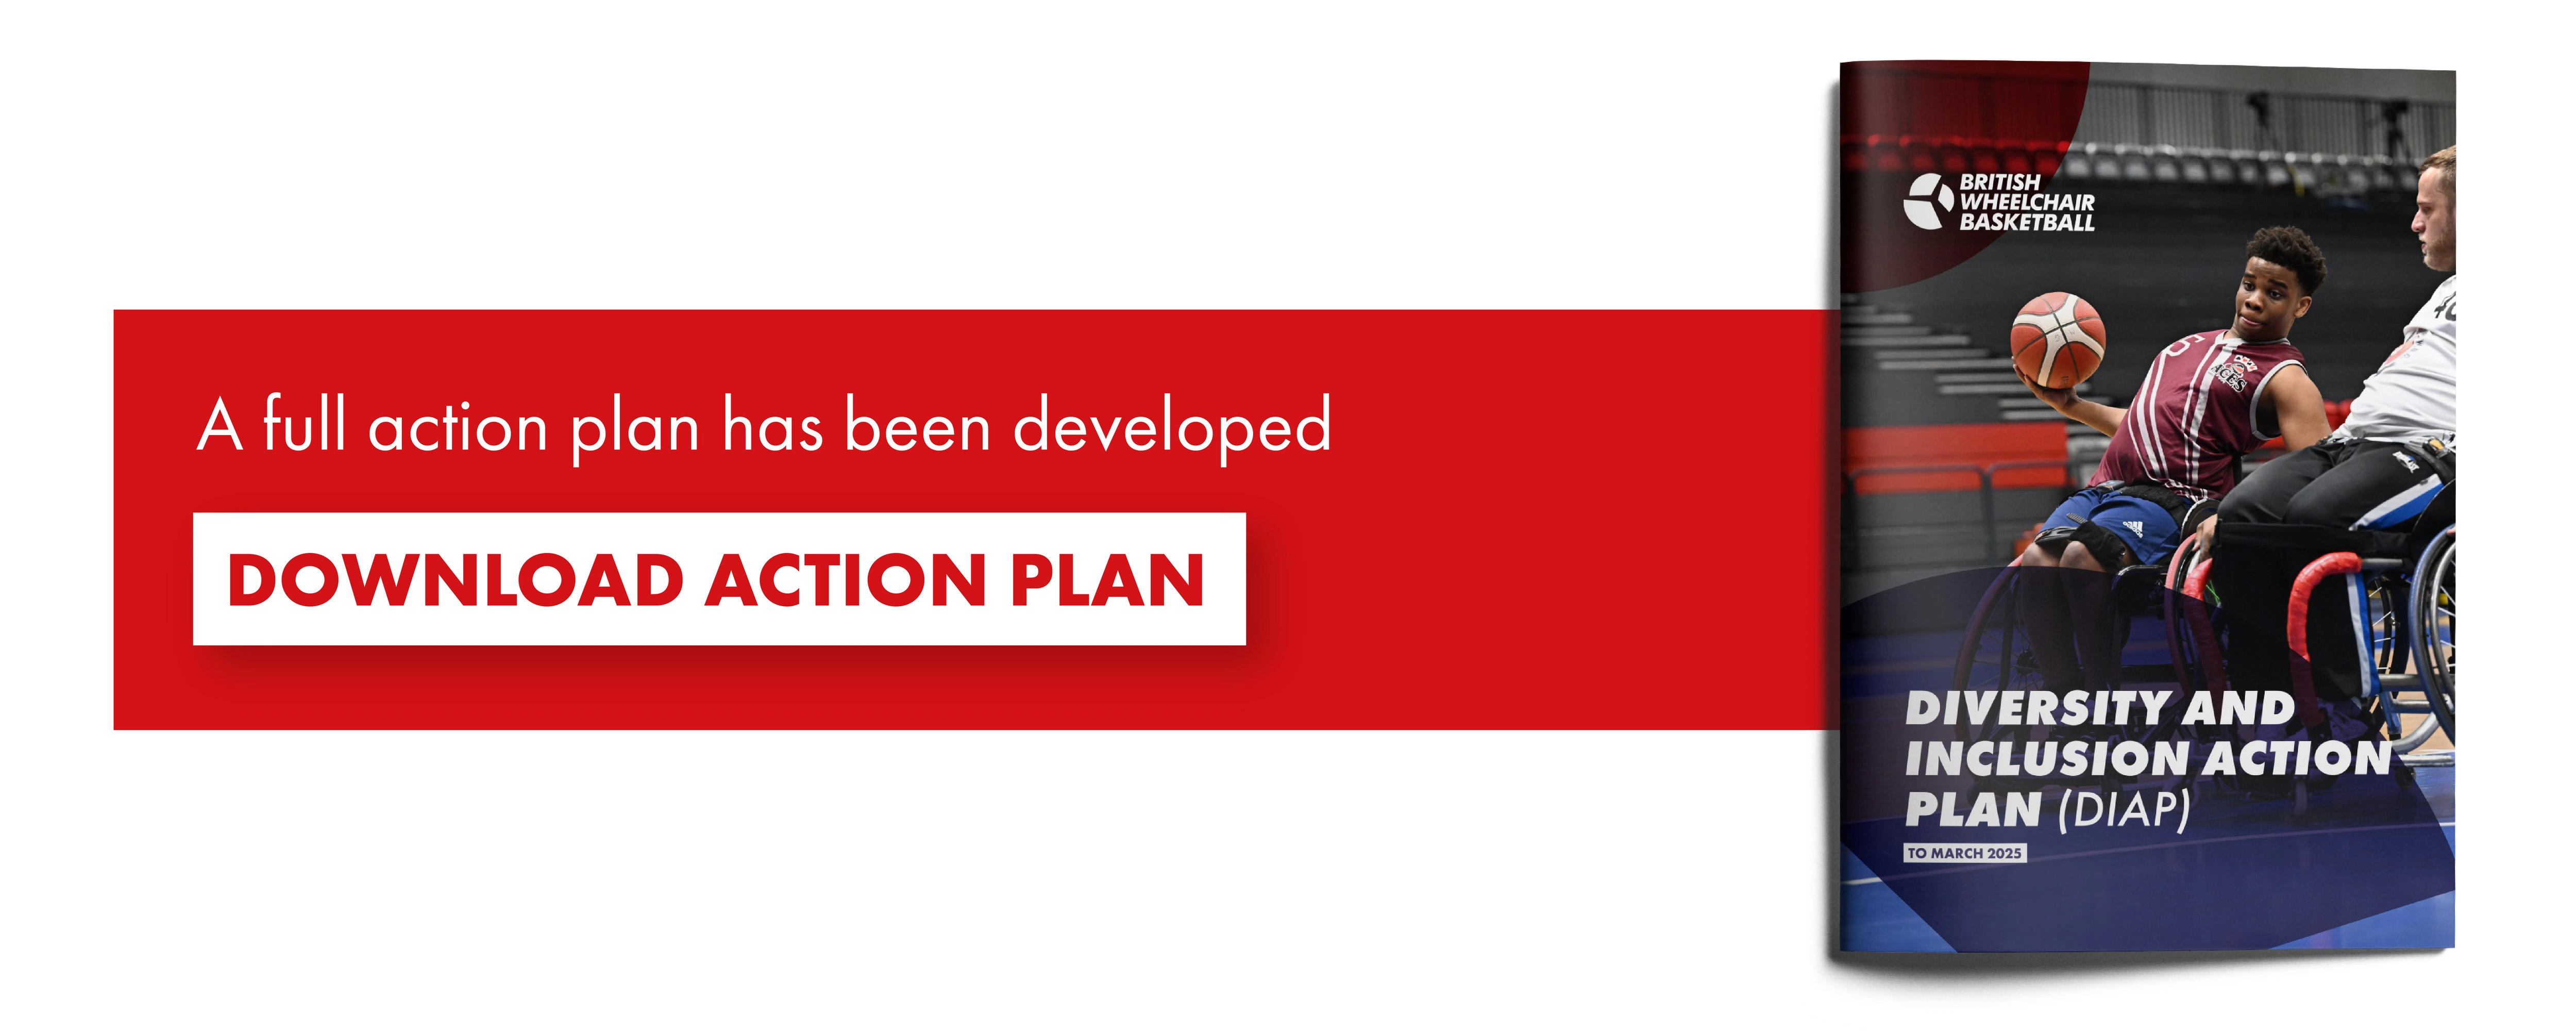 A full action plan has been developed. Download the action plan.